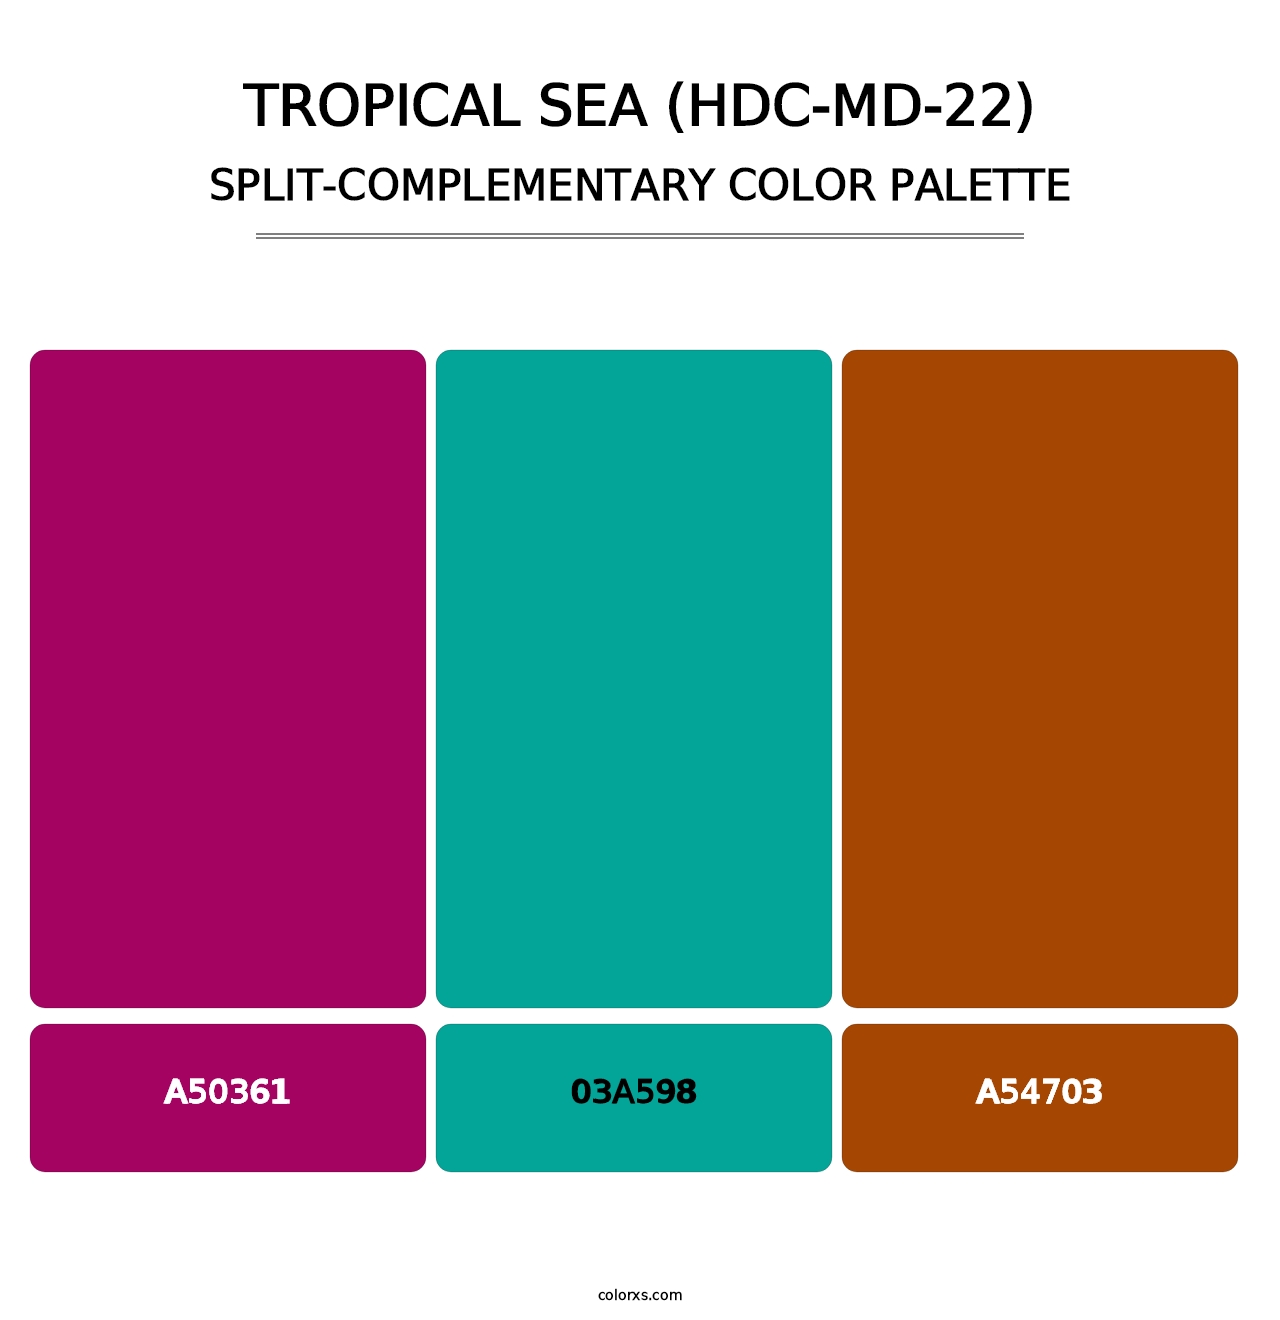 Tropical Sea (HDC-MD-22) - Split-Complementary Color Palette